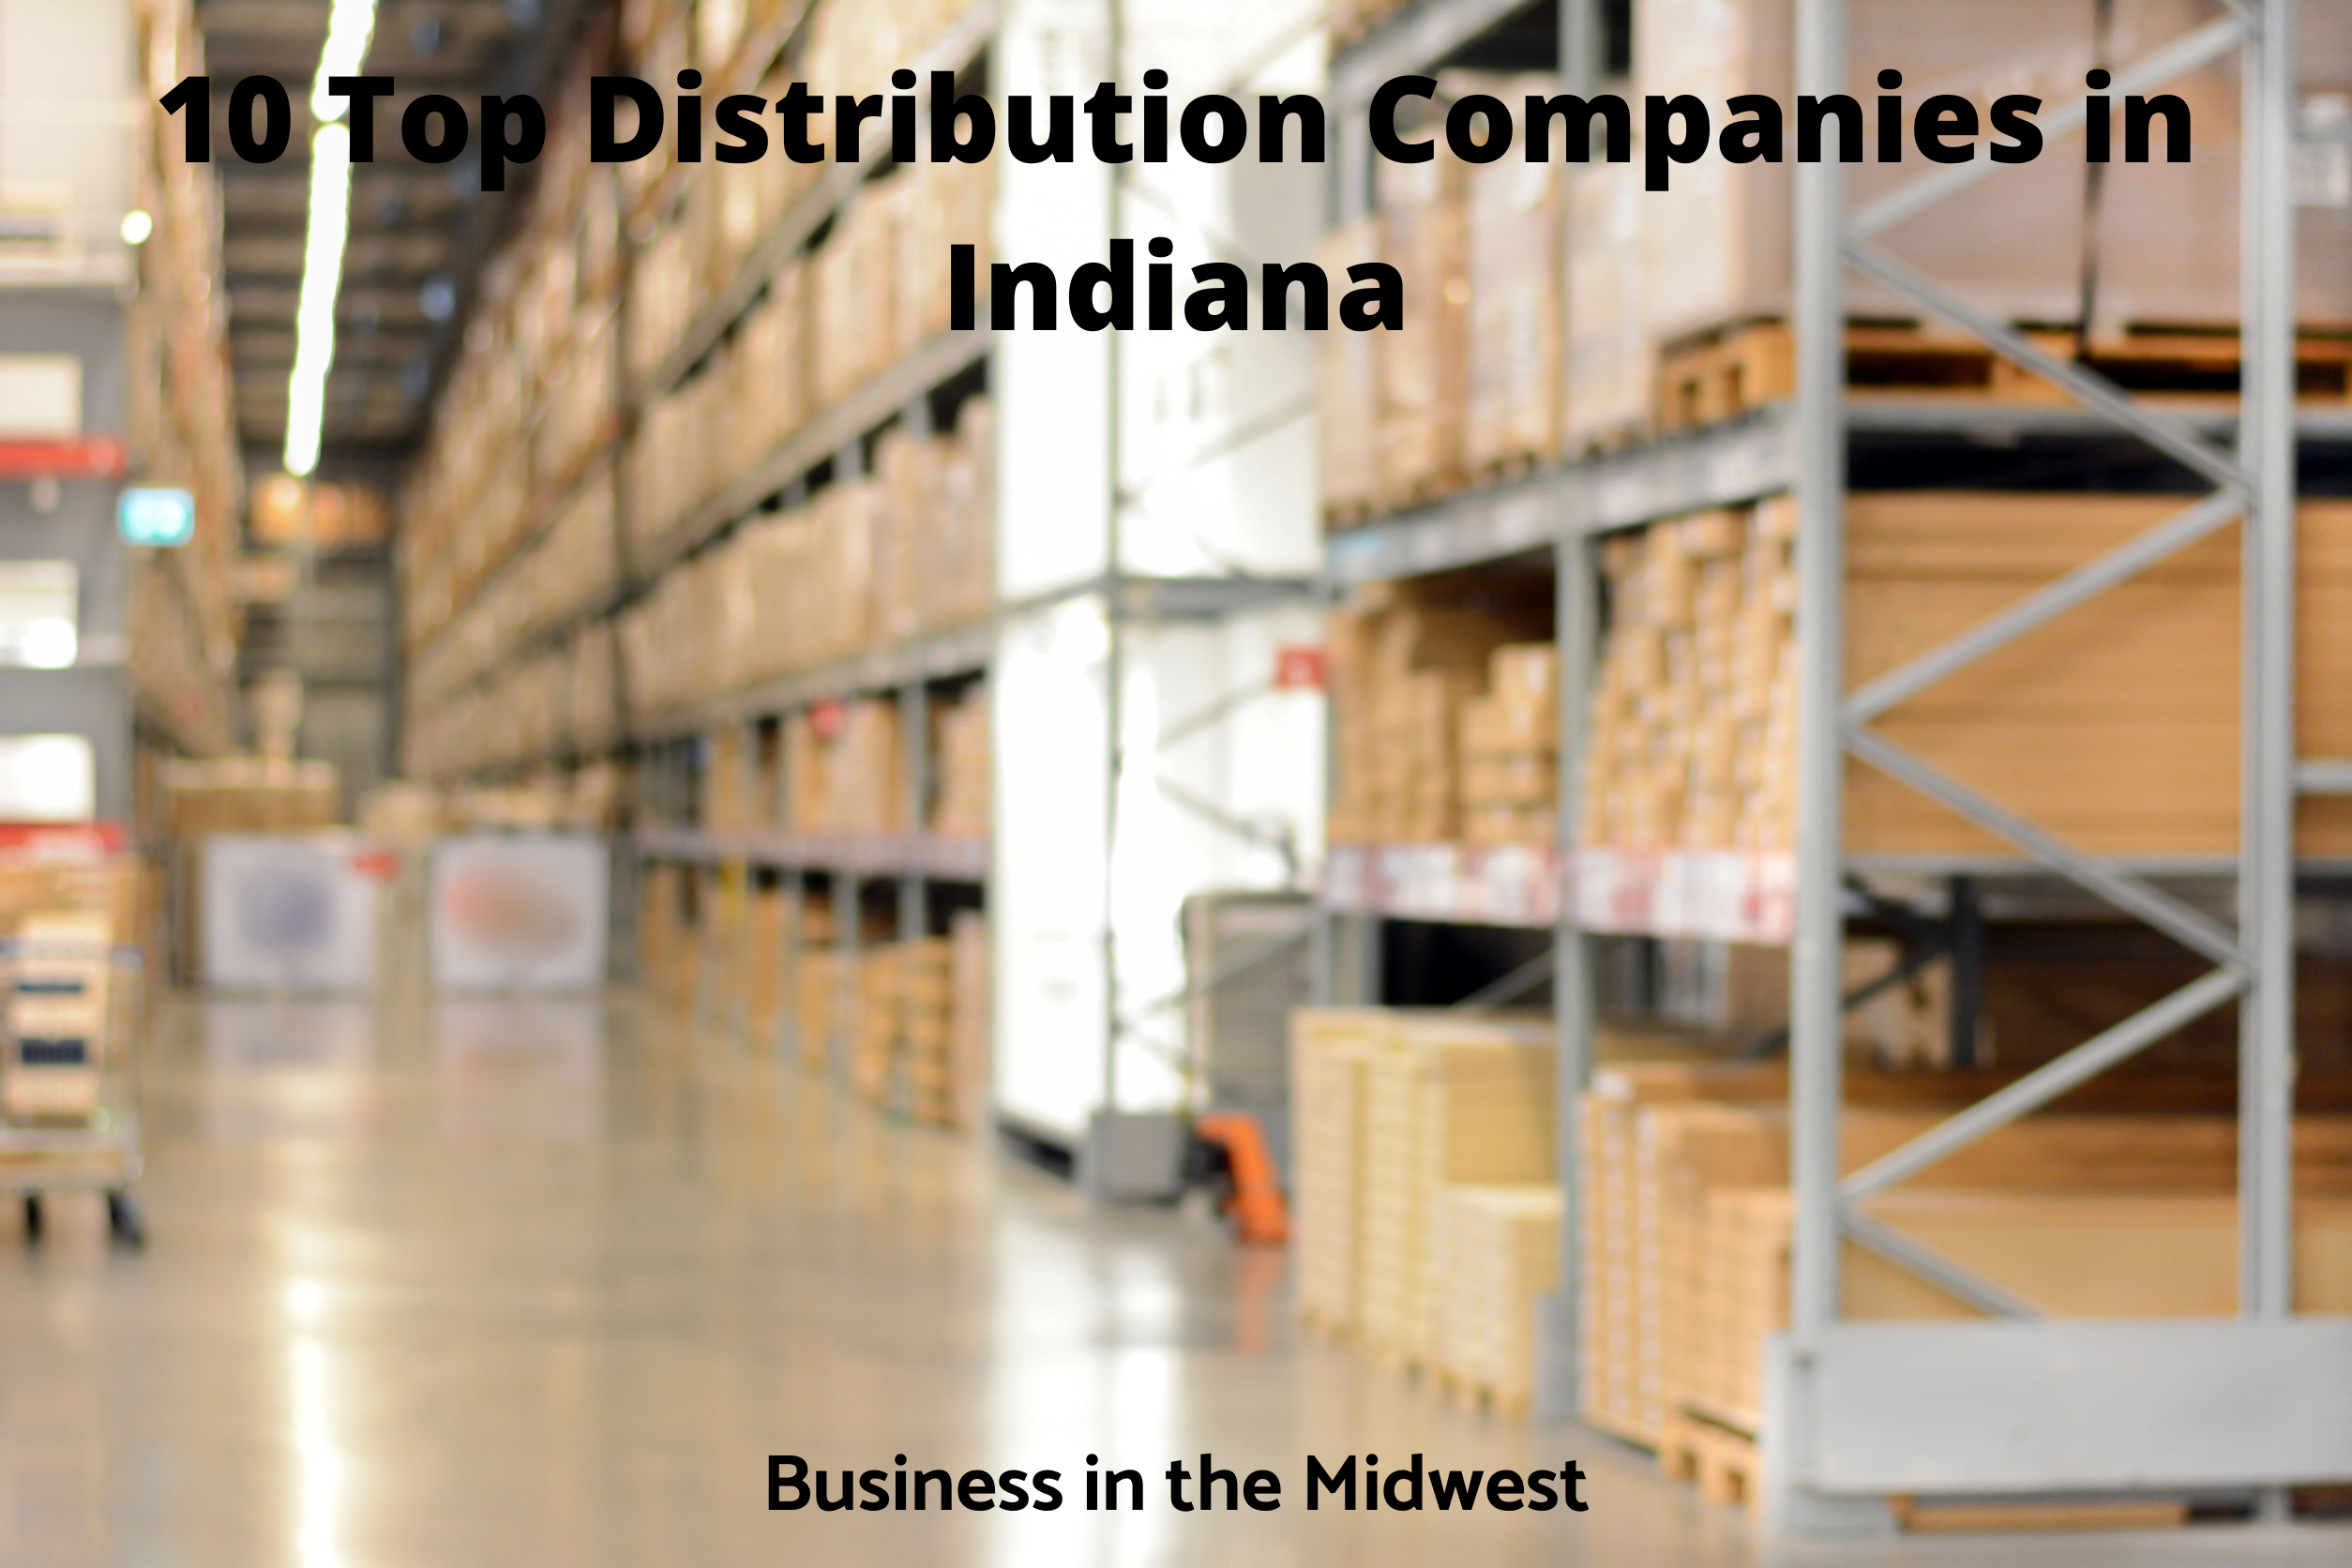 What is the main industry in Indiana?